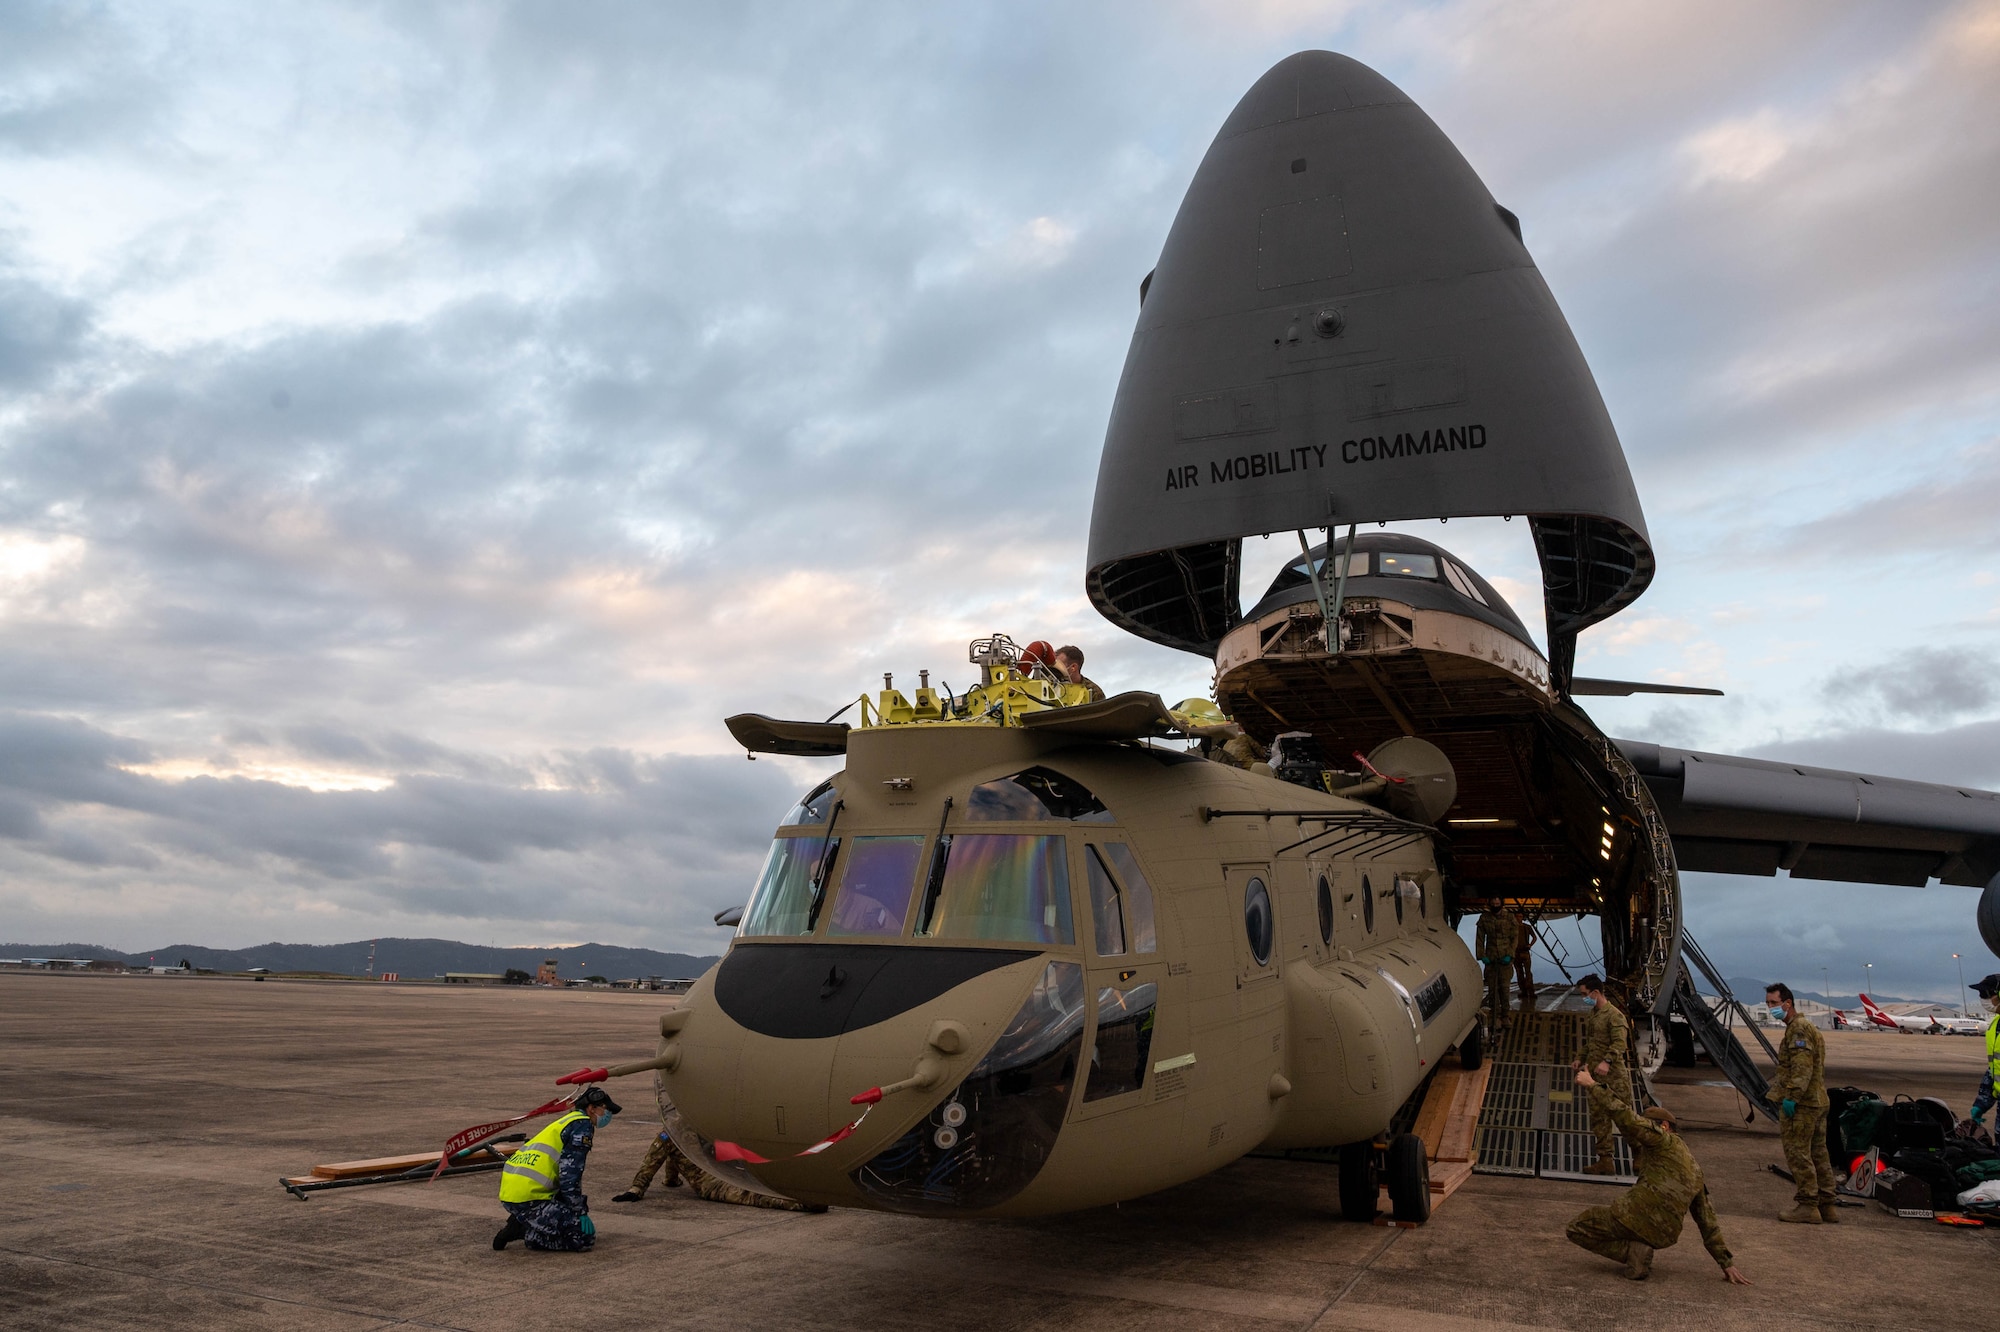 A CH-47F Chinook helicopter is unloaded from a Dover Air Force Base C-5M Super Galaxy at Royal Australian Air Force Base Townsville, Australia, July 7, 2021. The C-5 transported two CH-47F Chinook helicopters to RAAF Base Townsville as a part of the Department of Defense’s Foreign Military Sales program. The U.S. and Australia maintain a robust relationship underpinned by shared democratic values, common interests and cultural bonds. The strong alliance is an anchor for peace and stability in the Indo-Pacific region and around the world. (U.S. Air Force photo by Senior Airman Faith Schaefer)